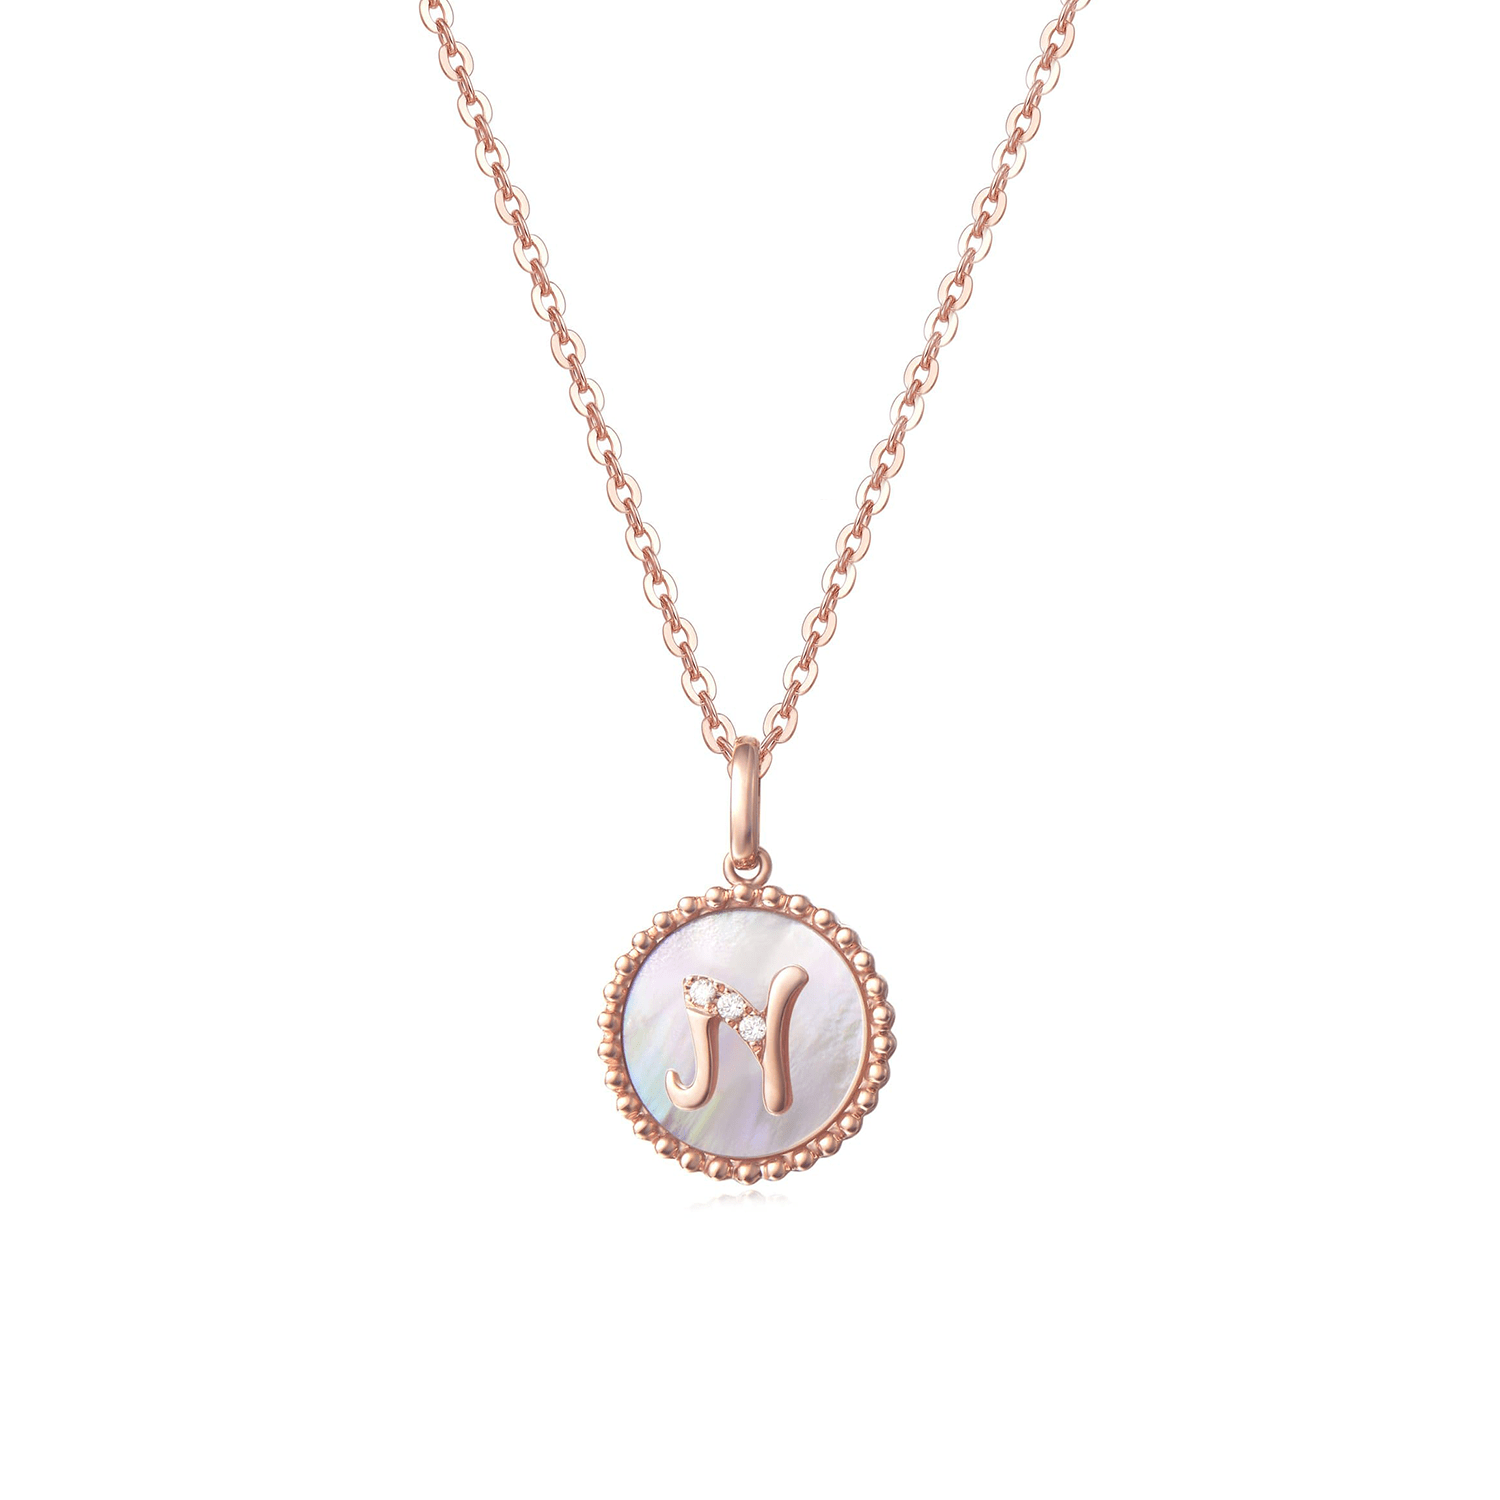 FANCIME Letter Initial Dainty 14K Rose Gold Necklace N Main